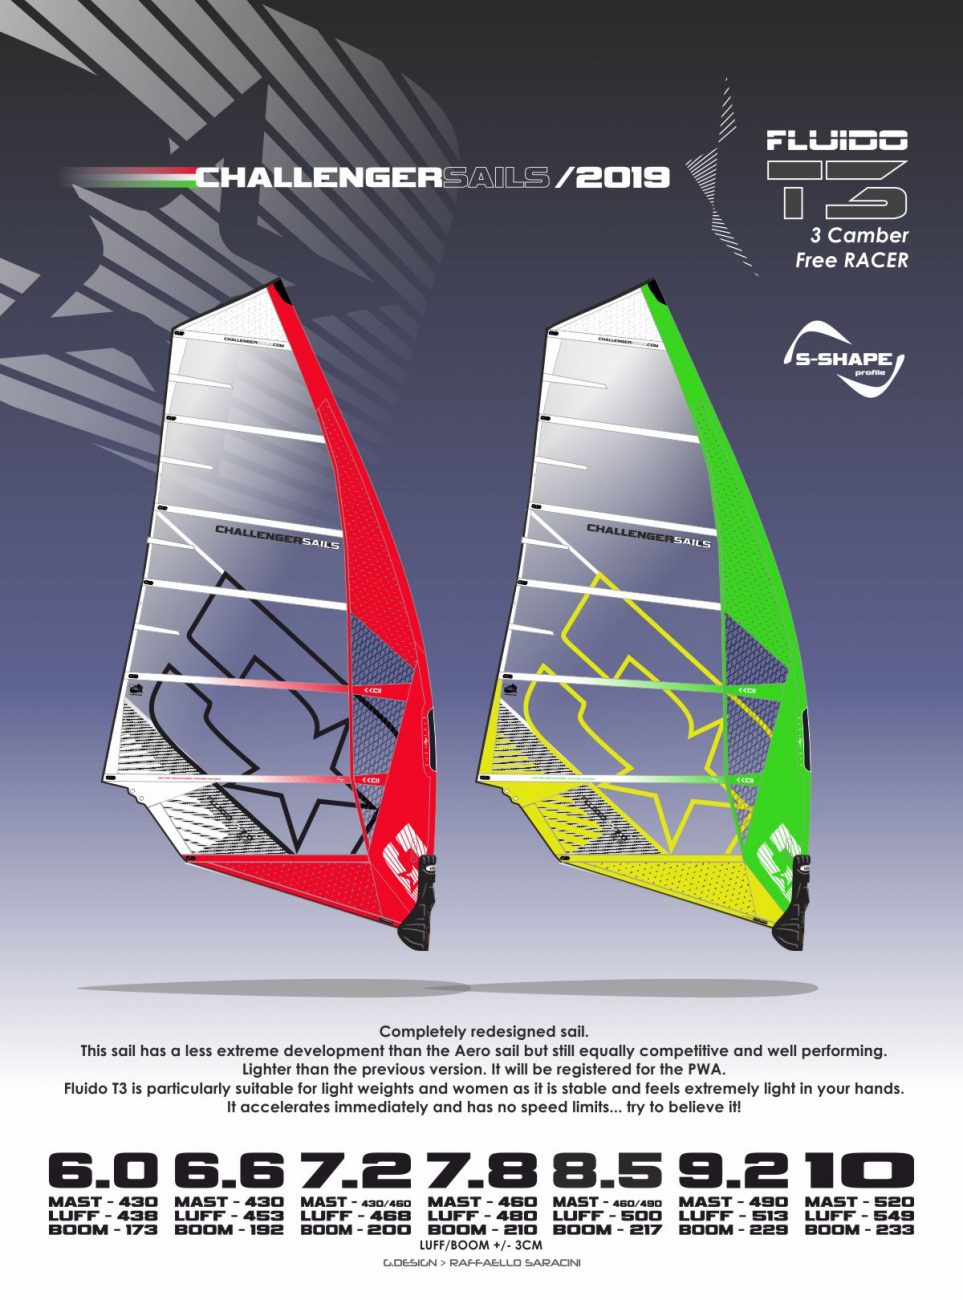 CHS 2019 FluidoT3 - 3 cam racing machine for lighter and samller rider or racers, who are looking for a sail with handling